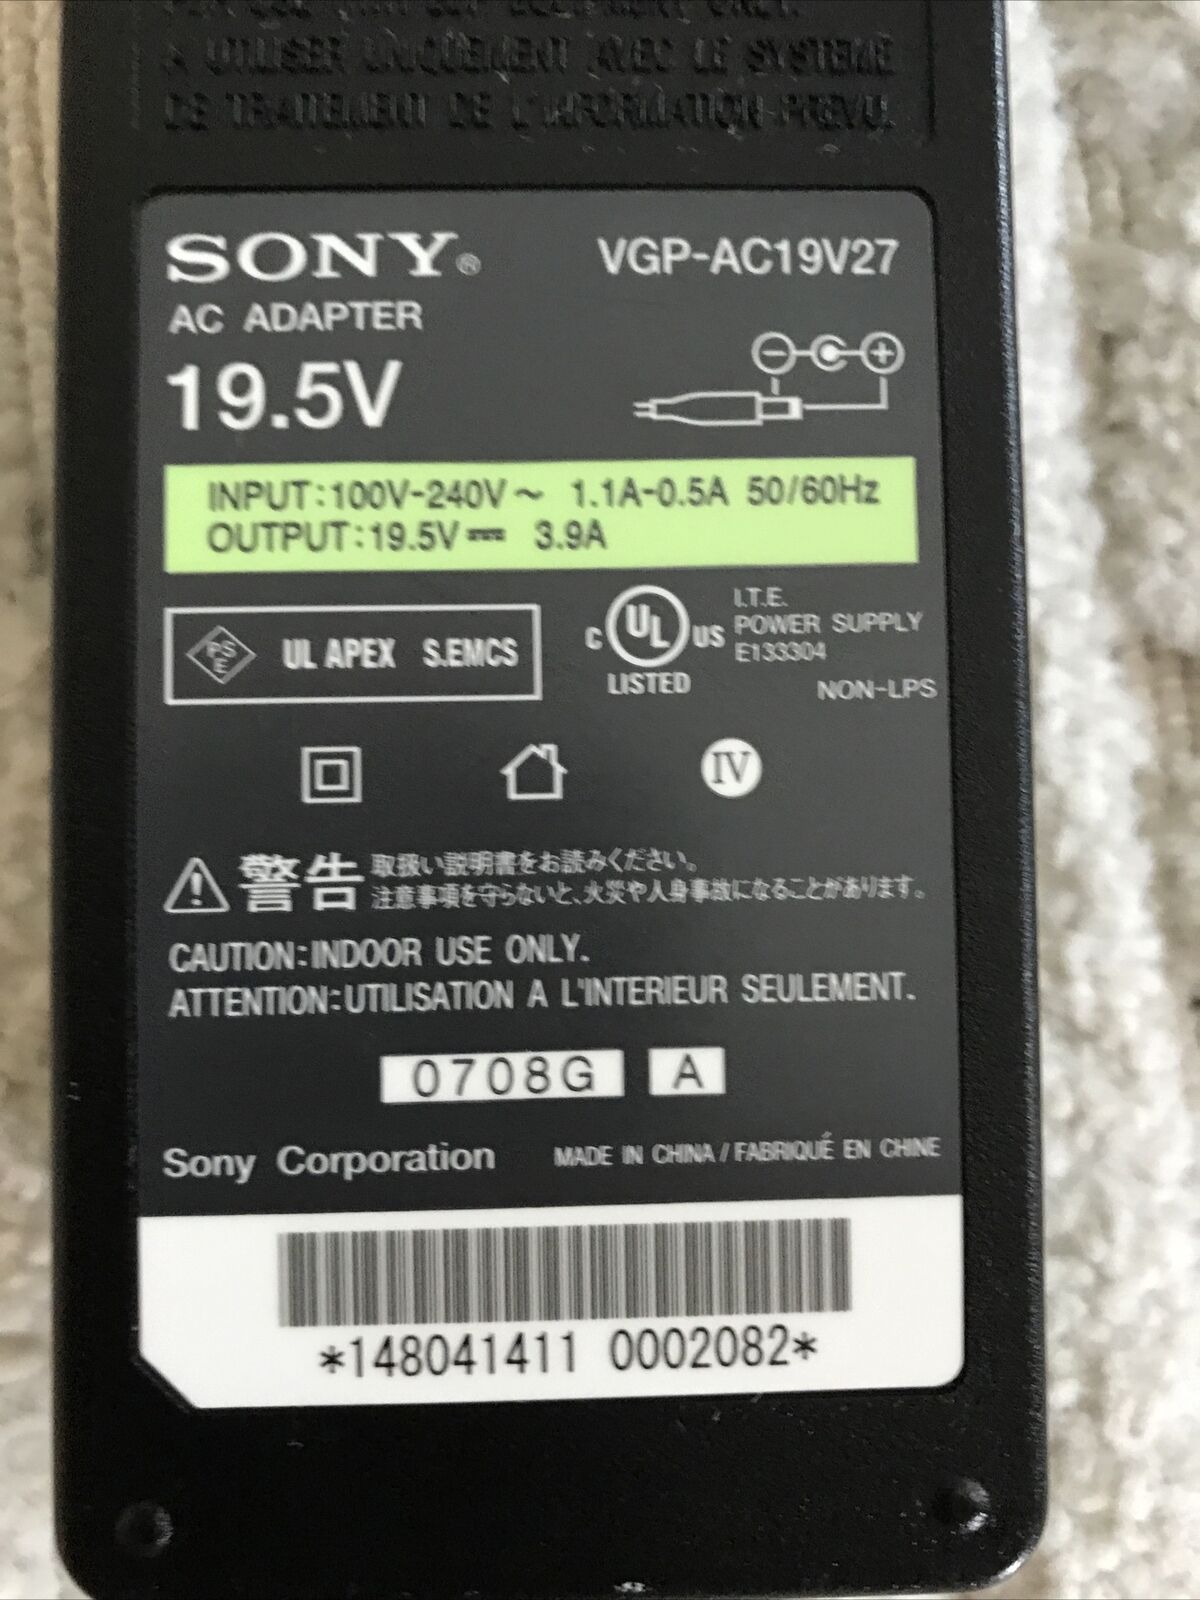 Sony Genuine Laptop Charger AC Adapter Power Supply VGP-AC19V27 19.5V 3.9A 76W B